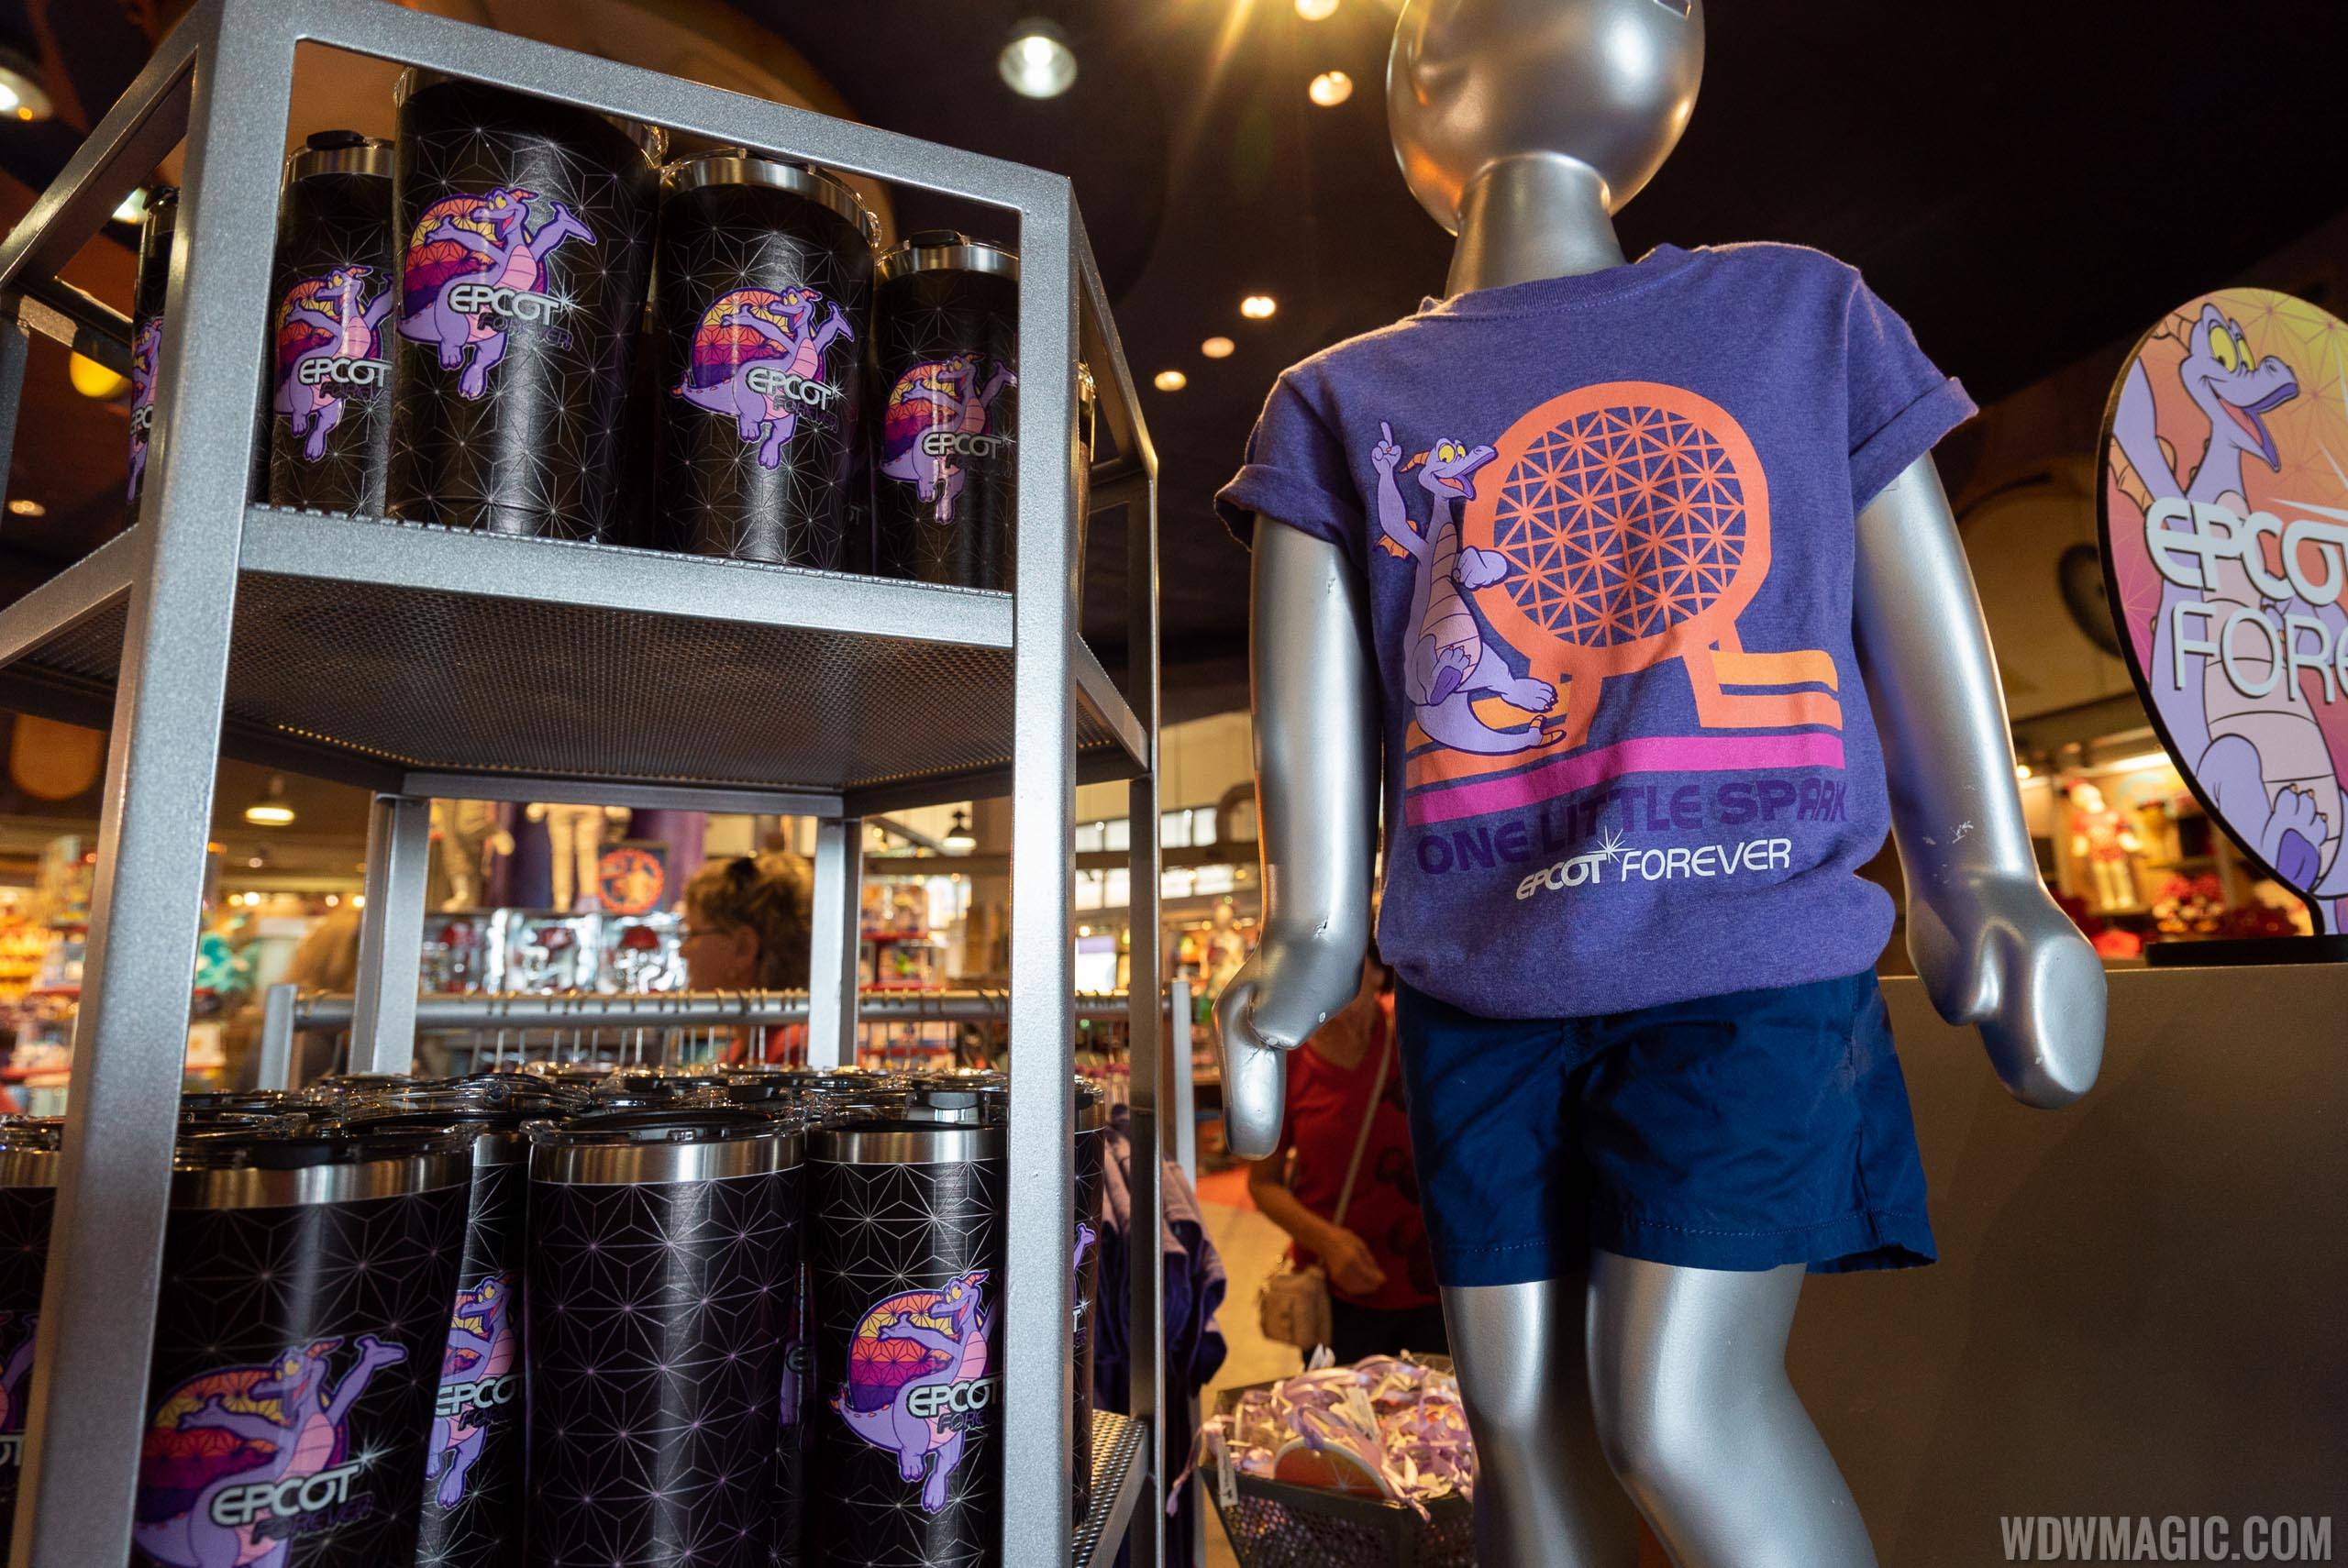 Epcot Forever merchandise